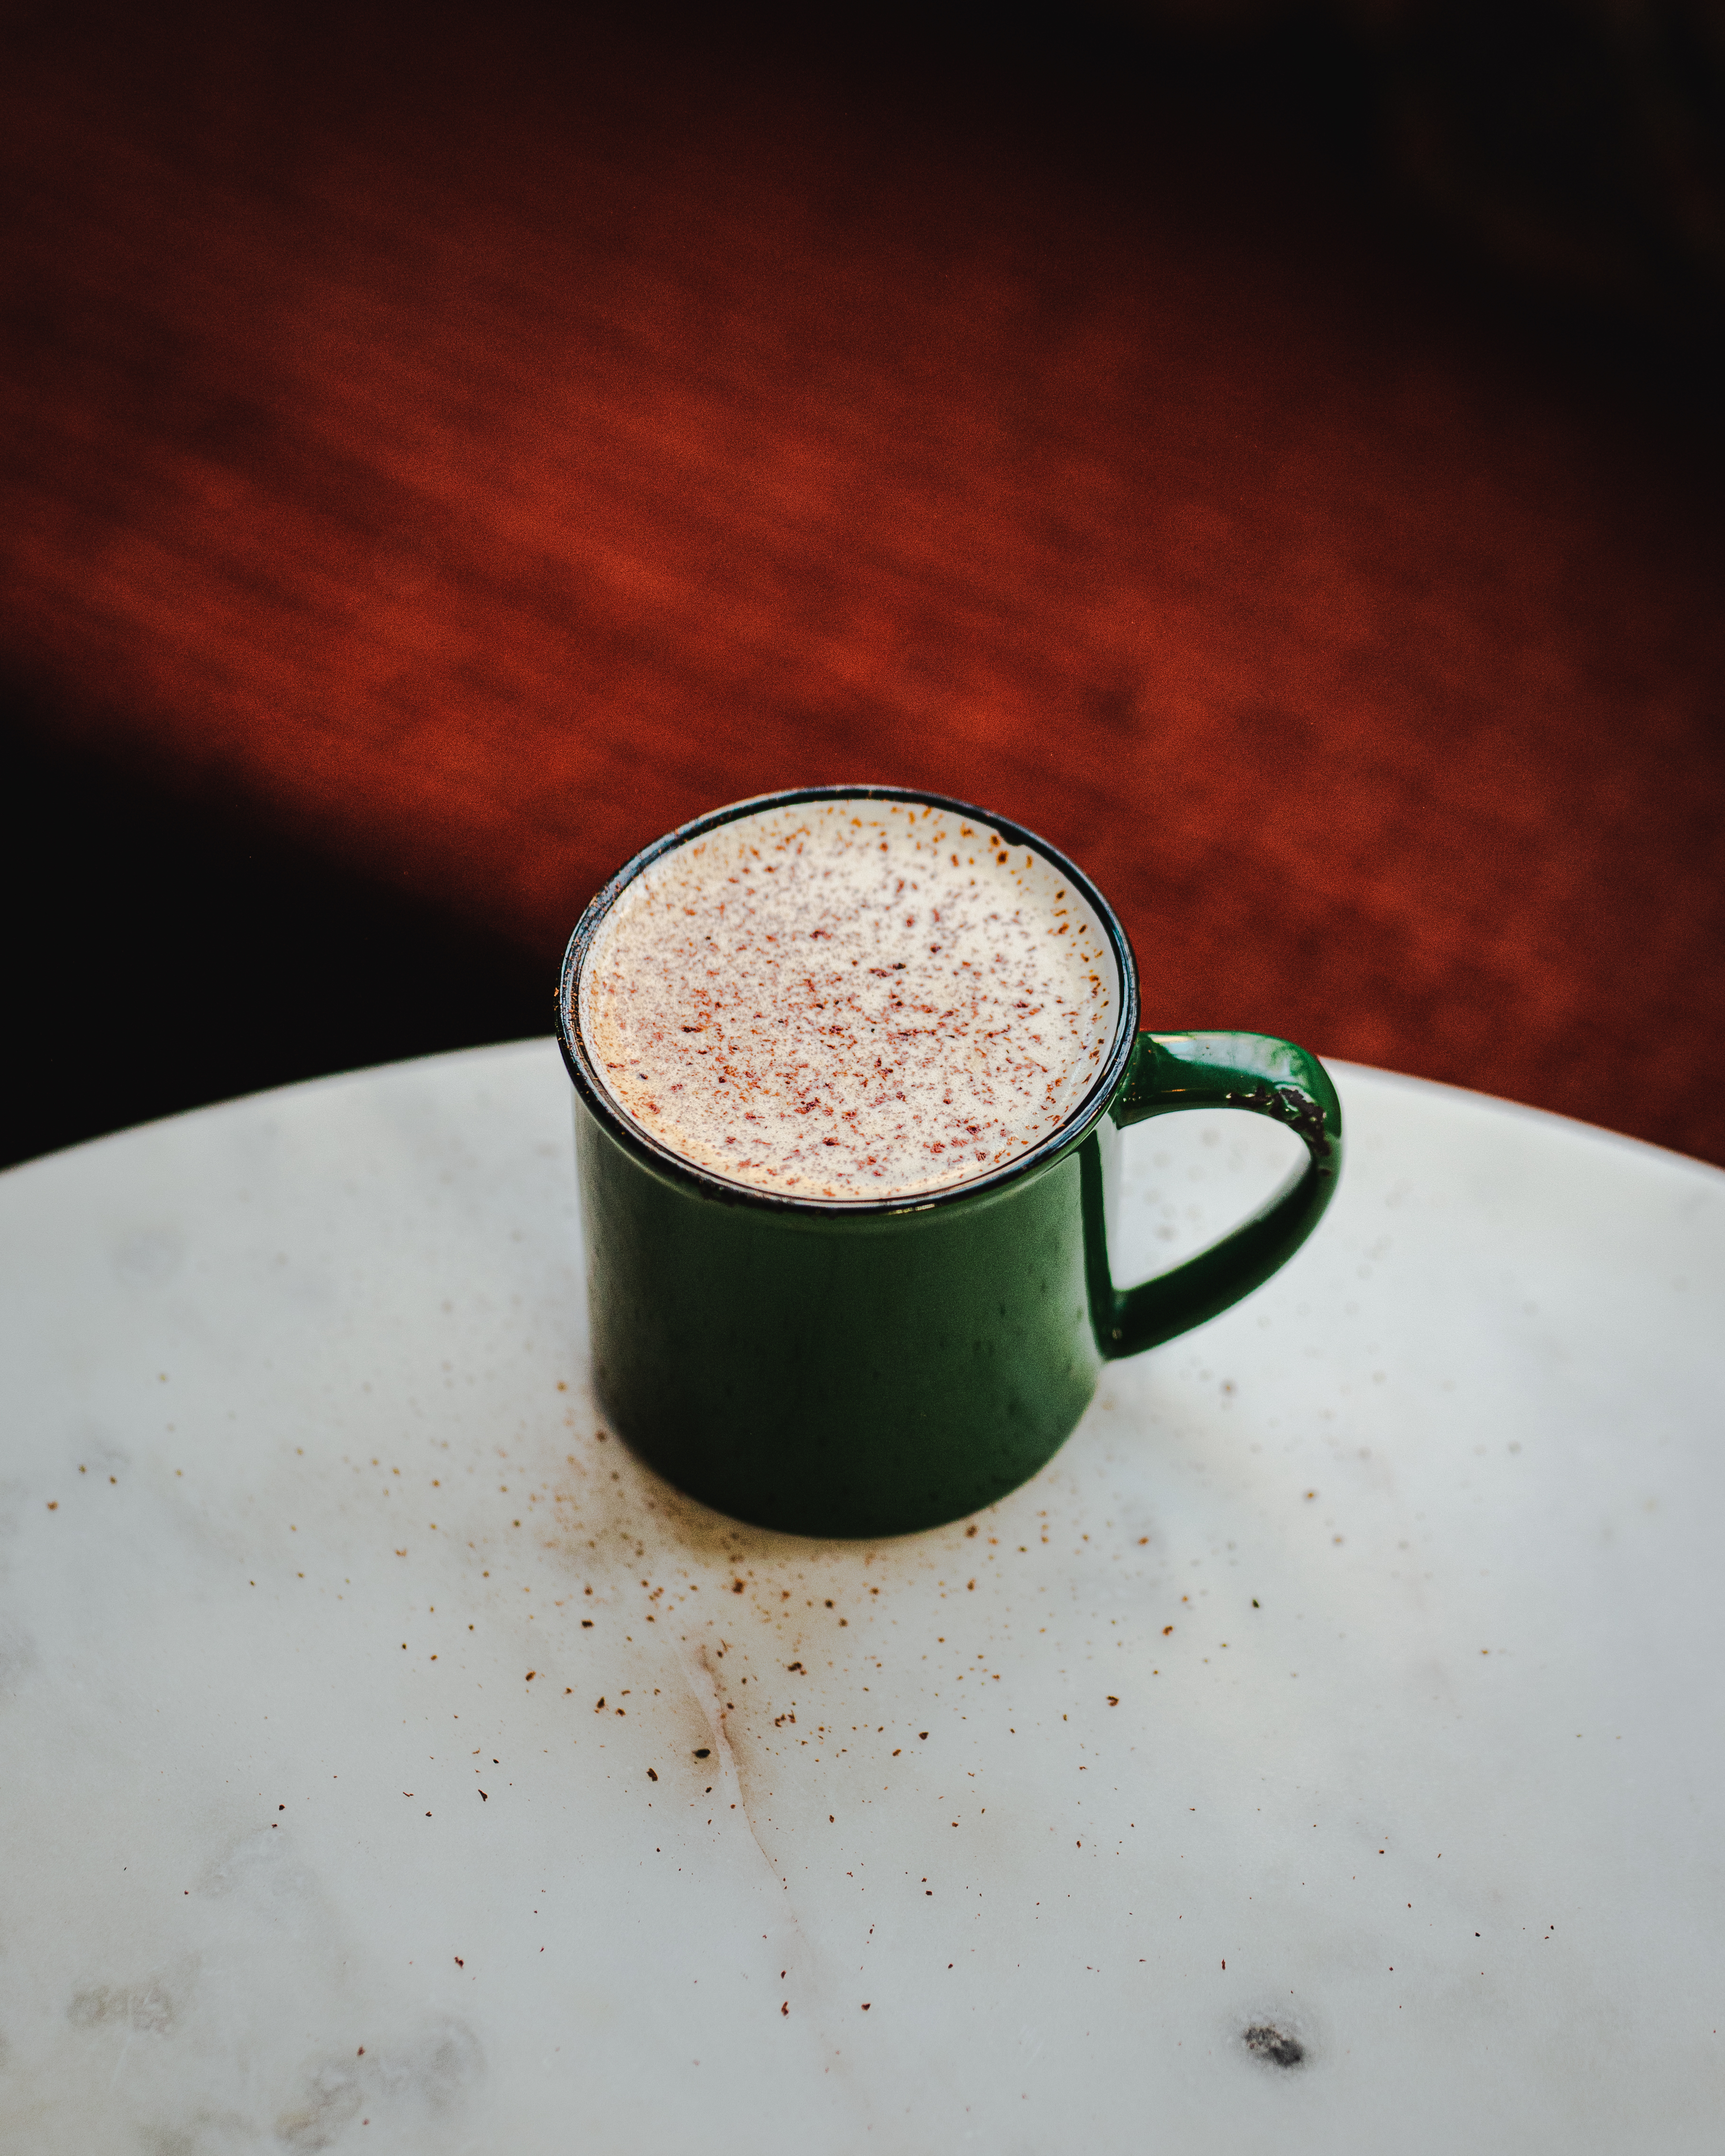 A shiny green mug filled with frothy spiked chai, placed on a marble table.